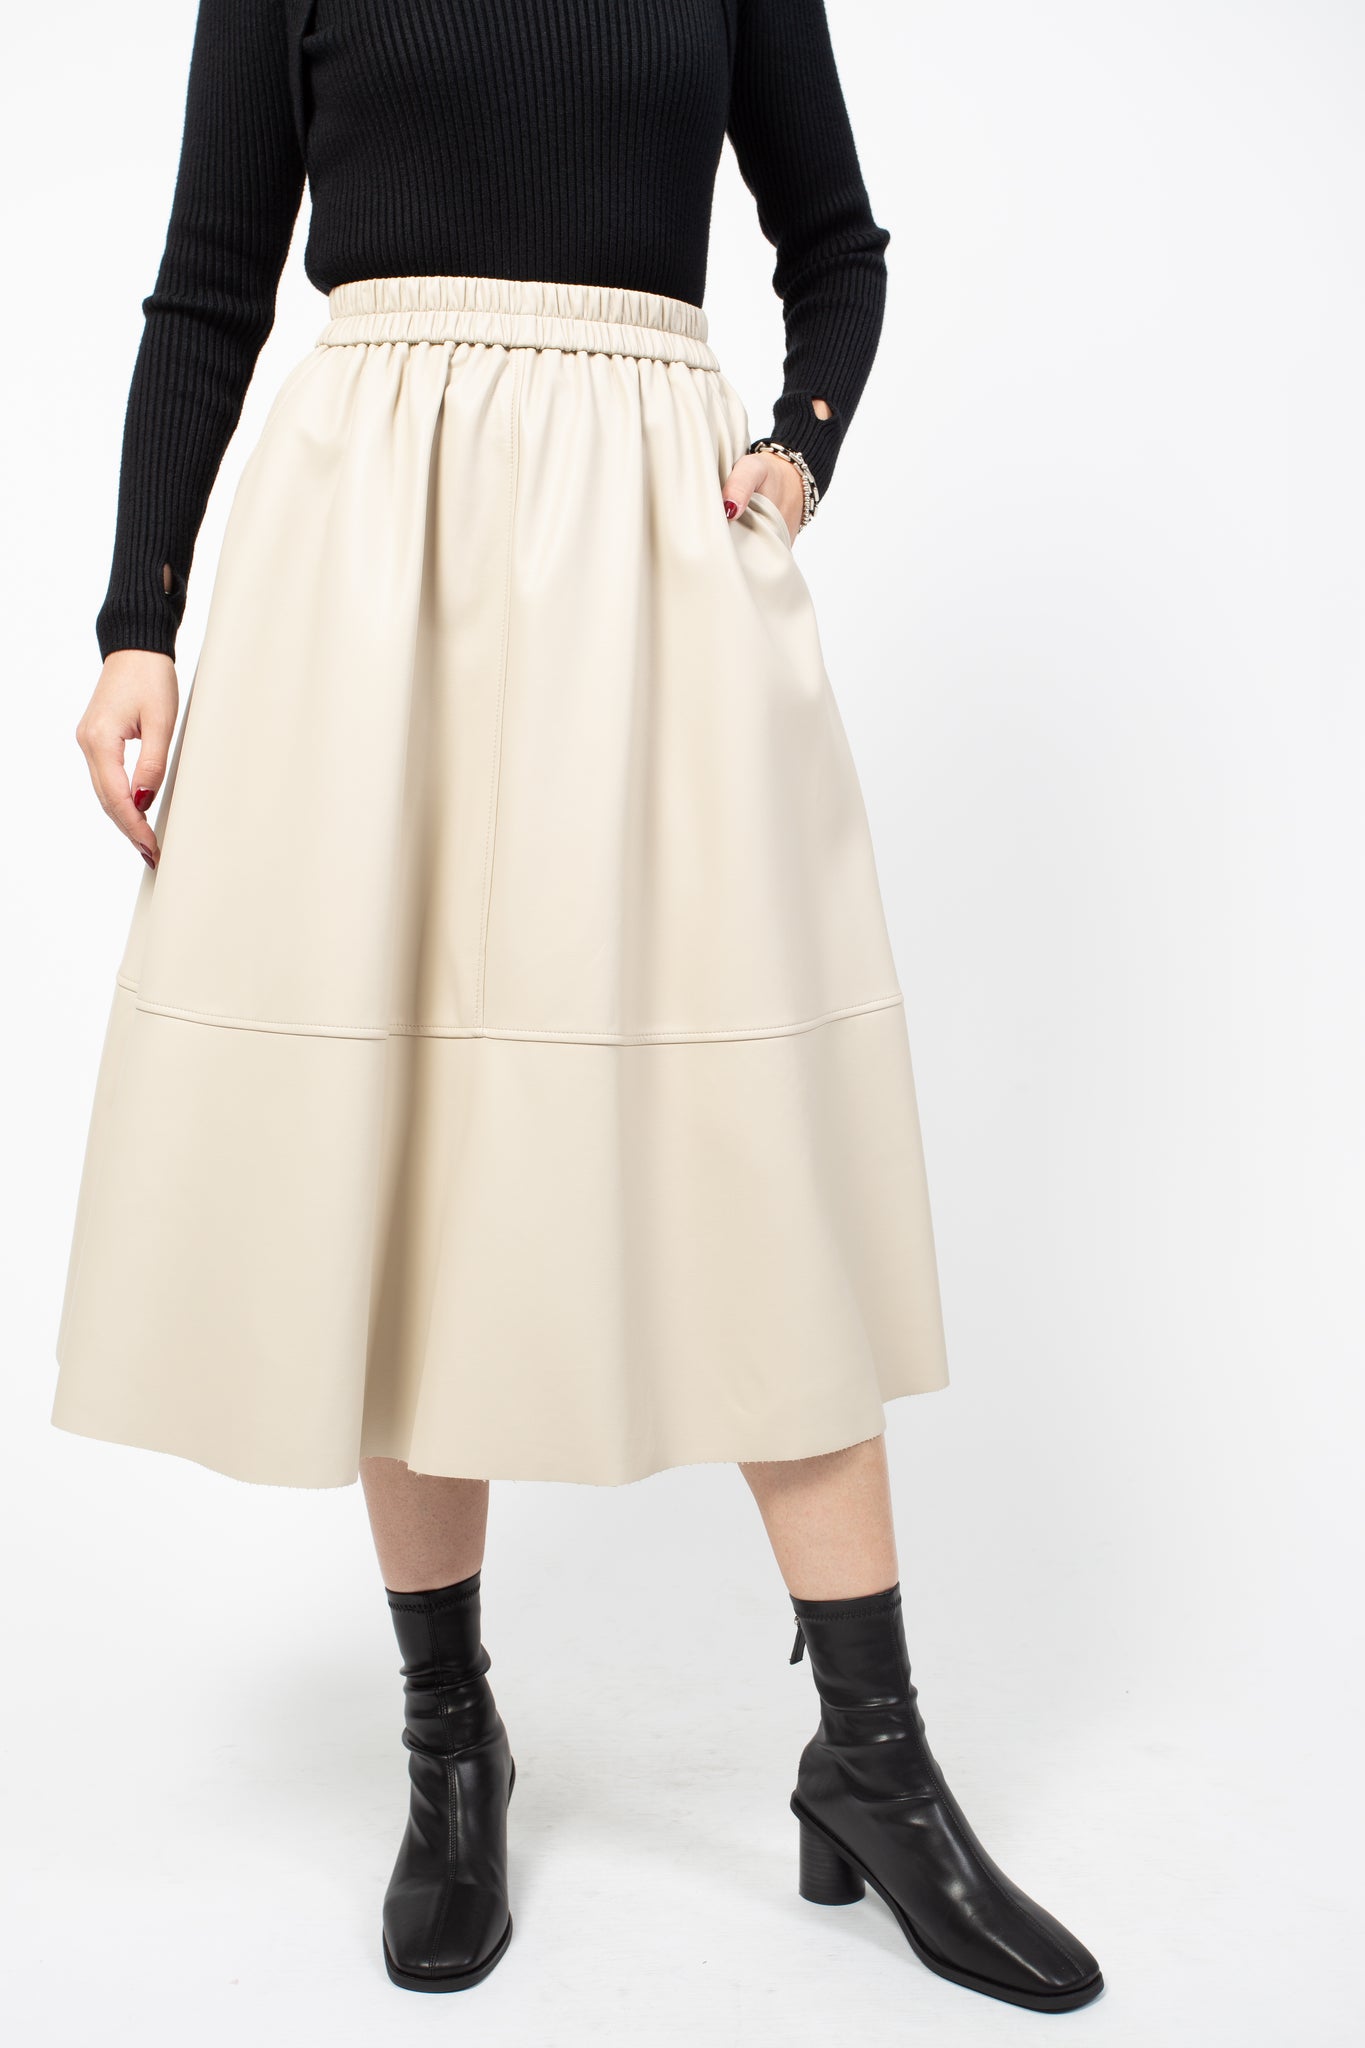 Faux Leather Pocket A-Line Skirt Ivory